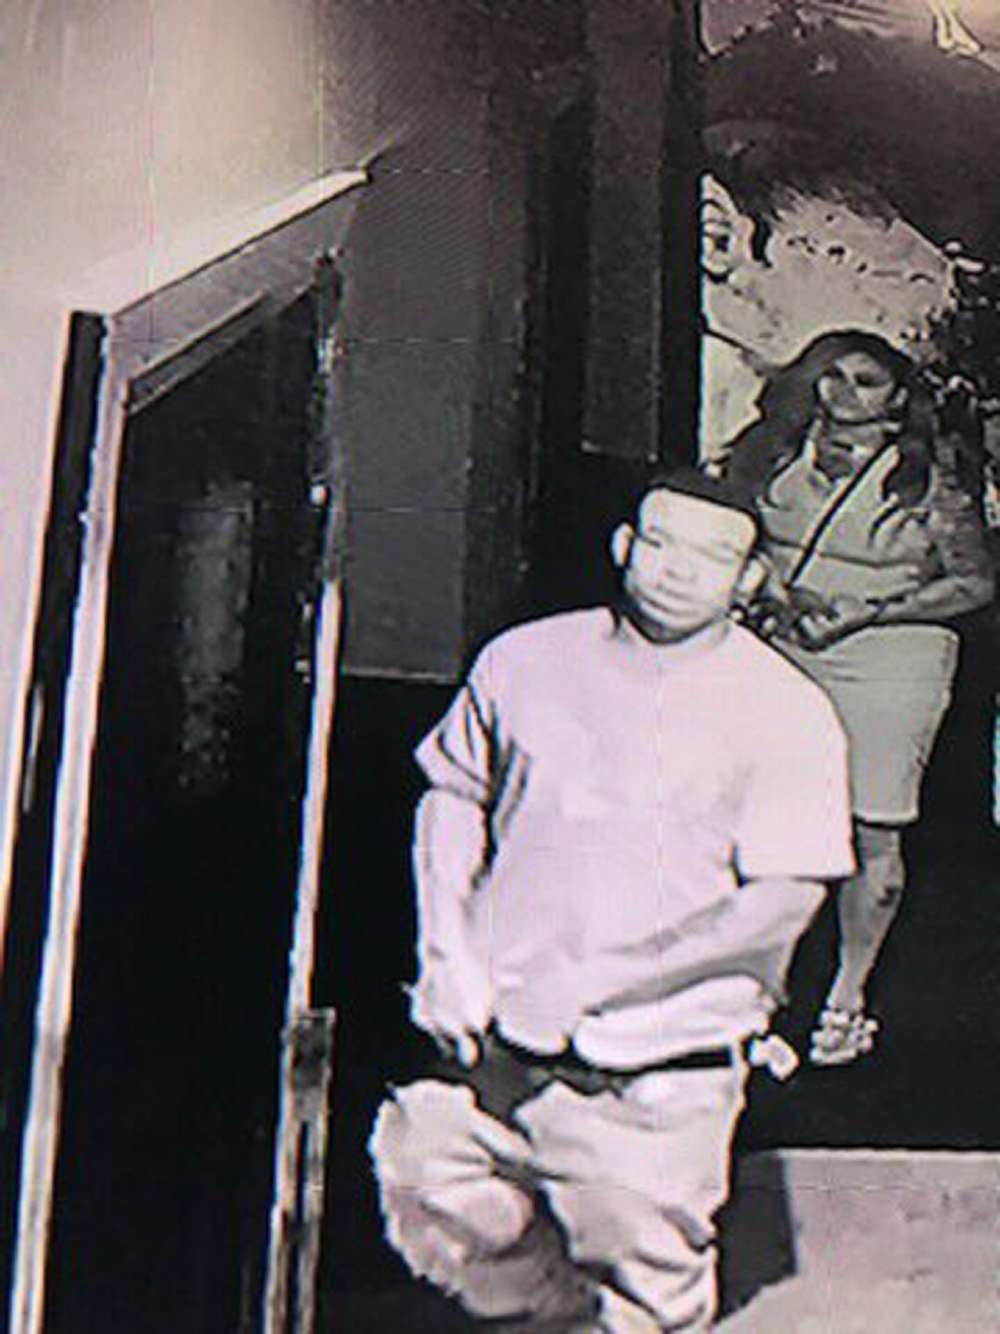 PHOTO: Hinds County Sheriff's Office are looking for a suspect accused of a shooting on July 4, 2020 in a Mississippi bar that killed one and injured three others.